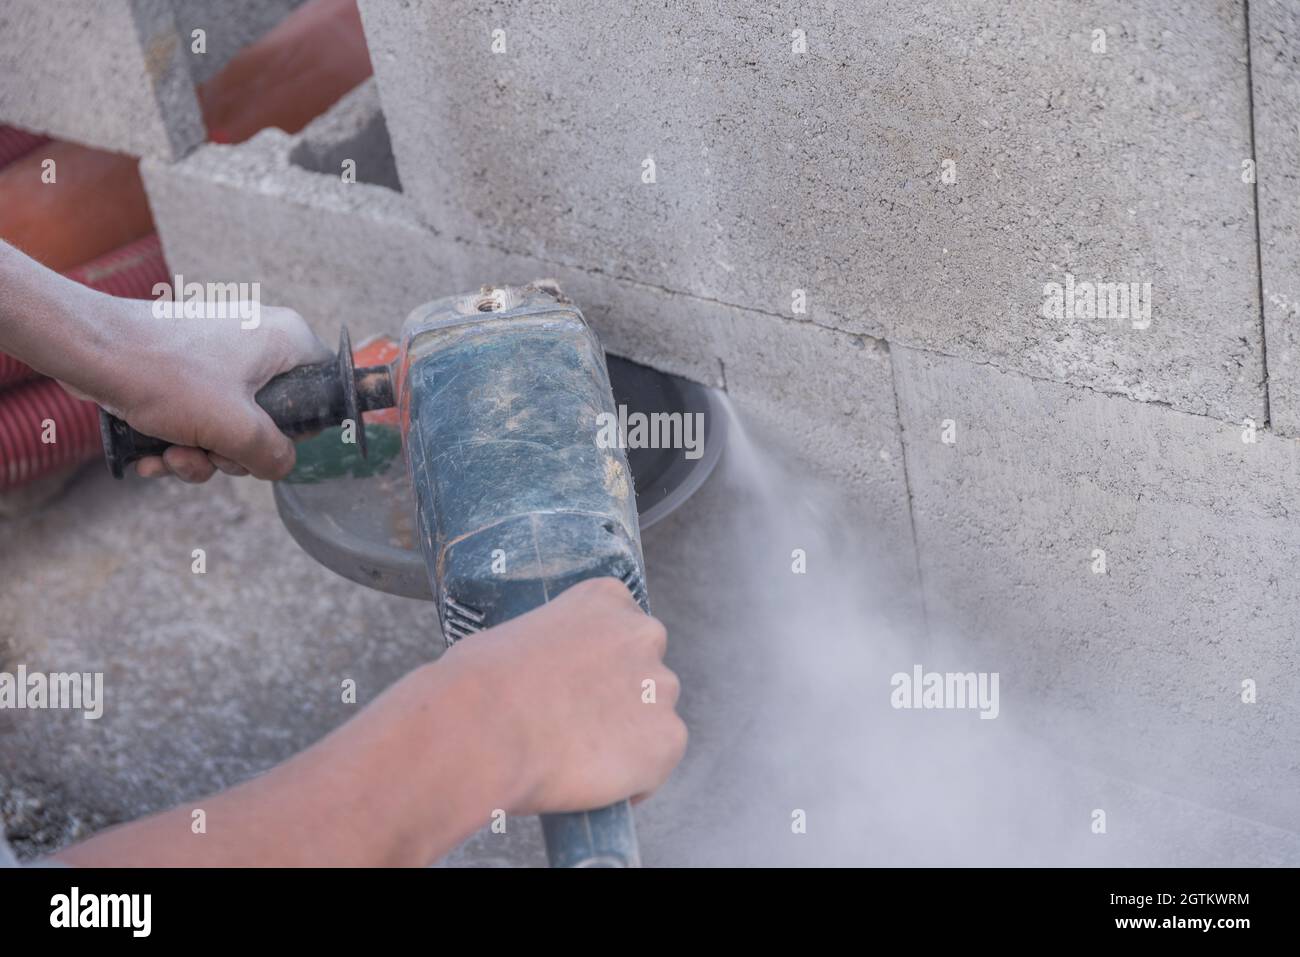 Loading Of A Construction Worker With An Angle Grinder - Construction Industry Stock Photo